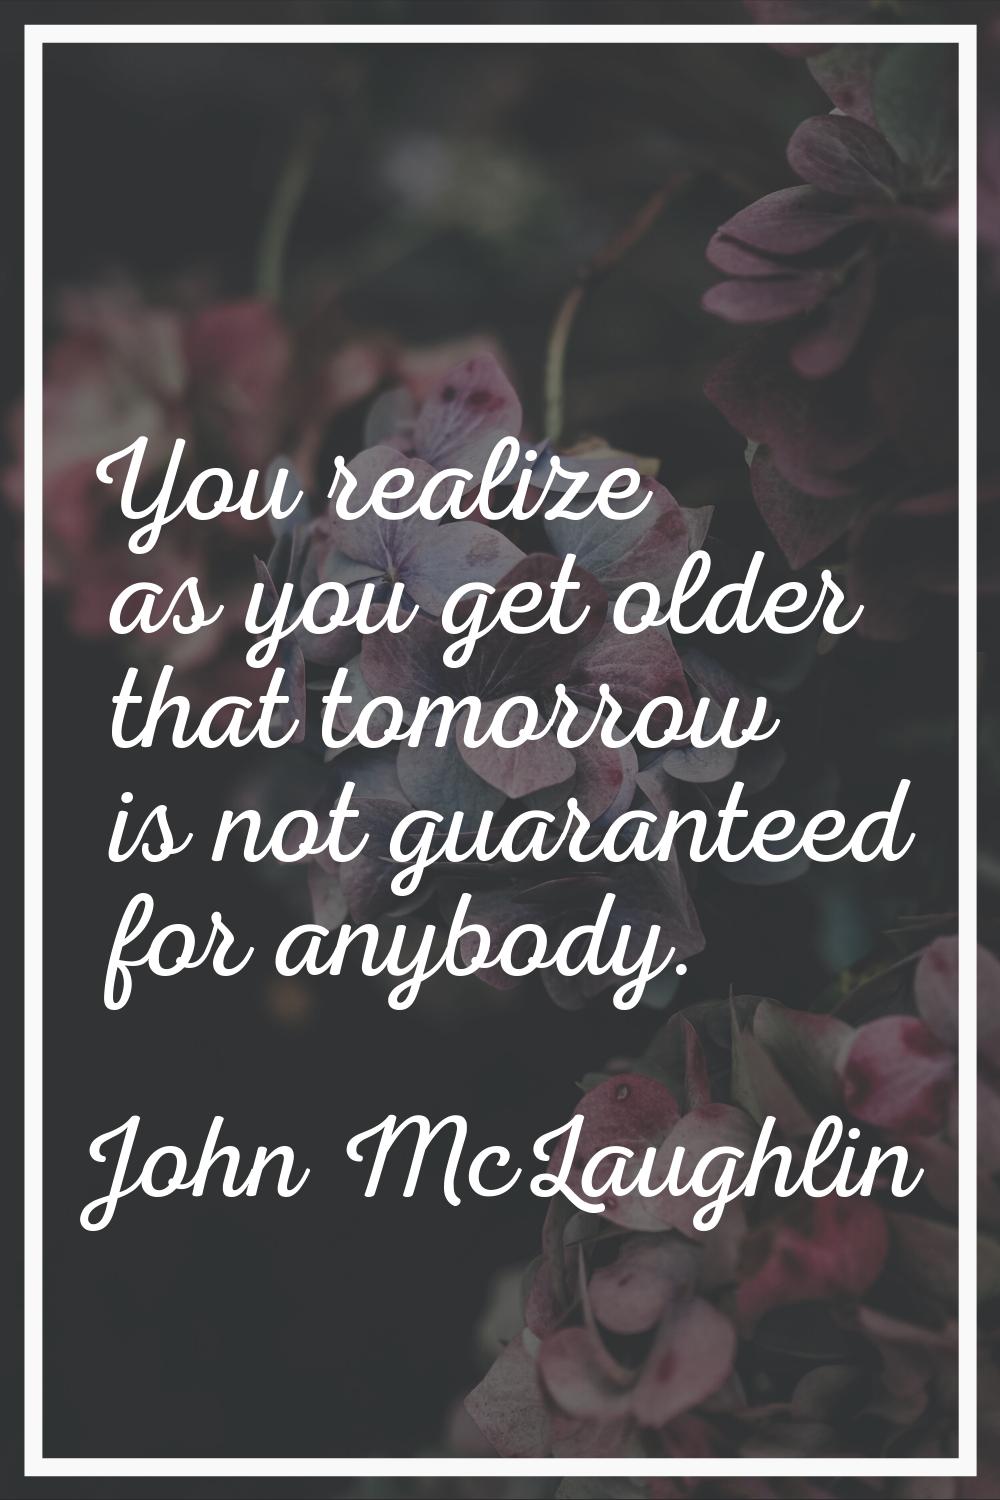 You realize as you get older that tomorrow is not guaranteed for anybody.